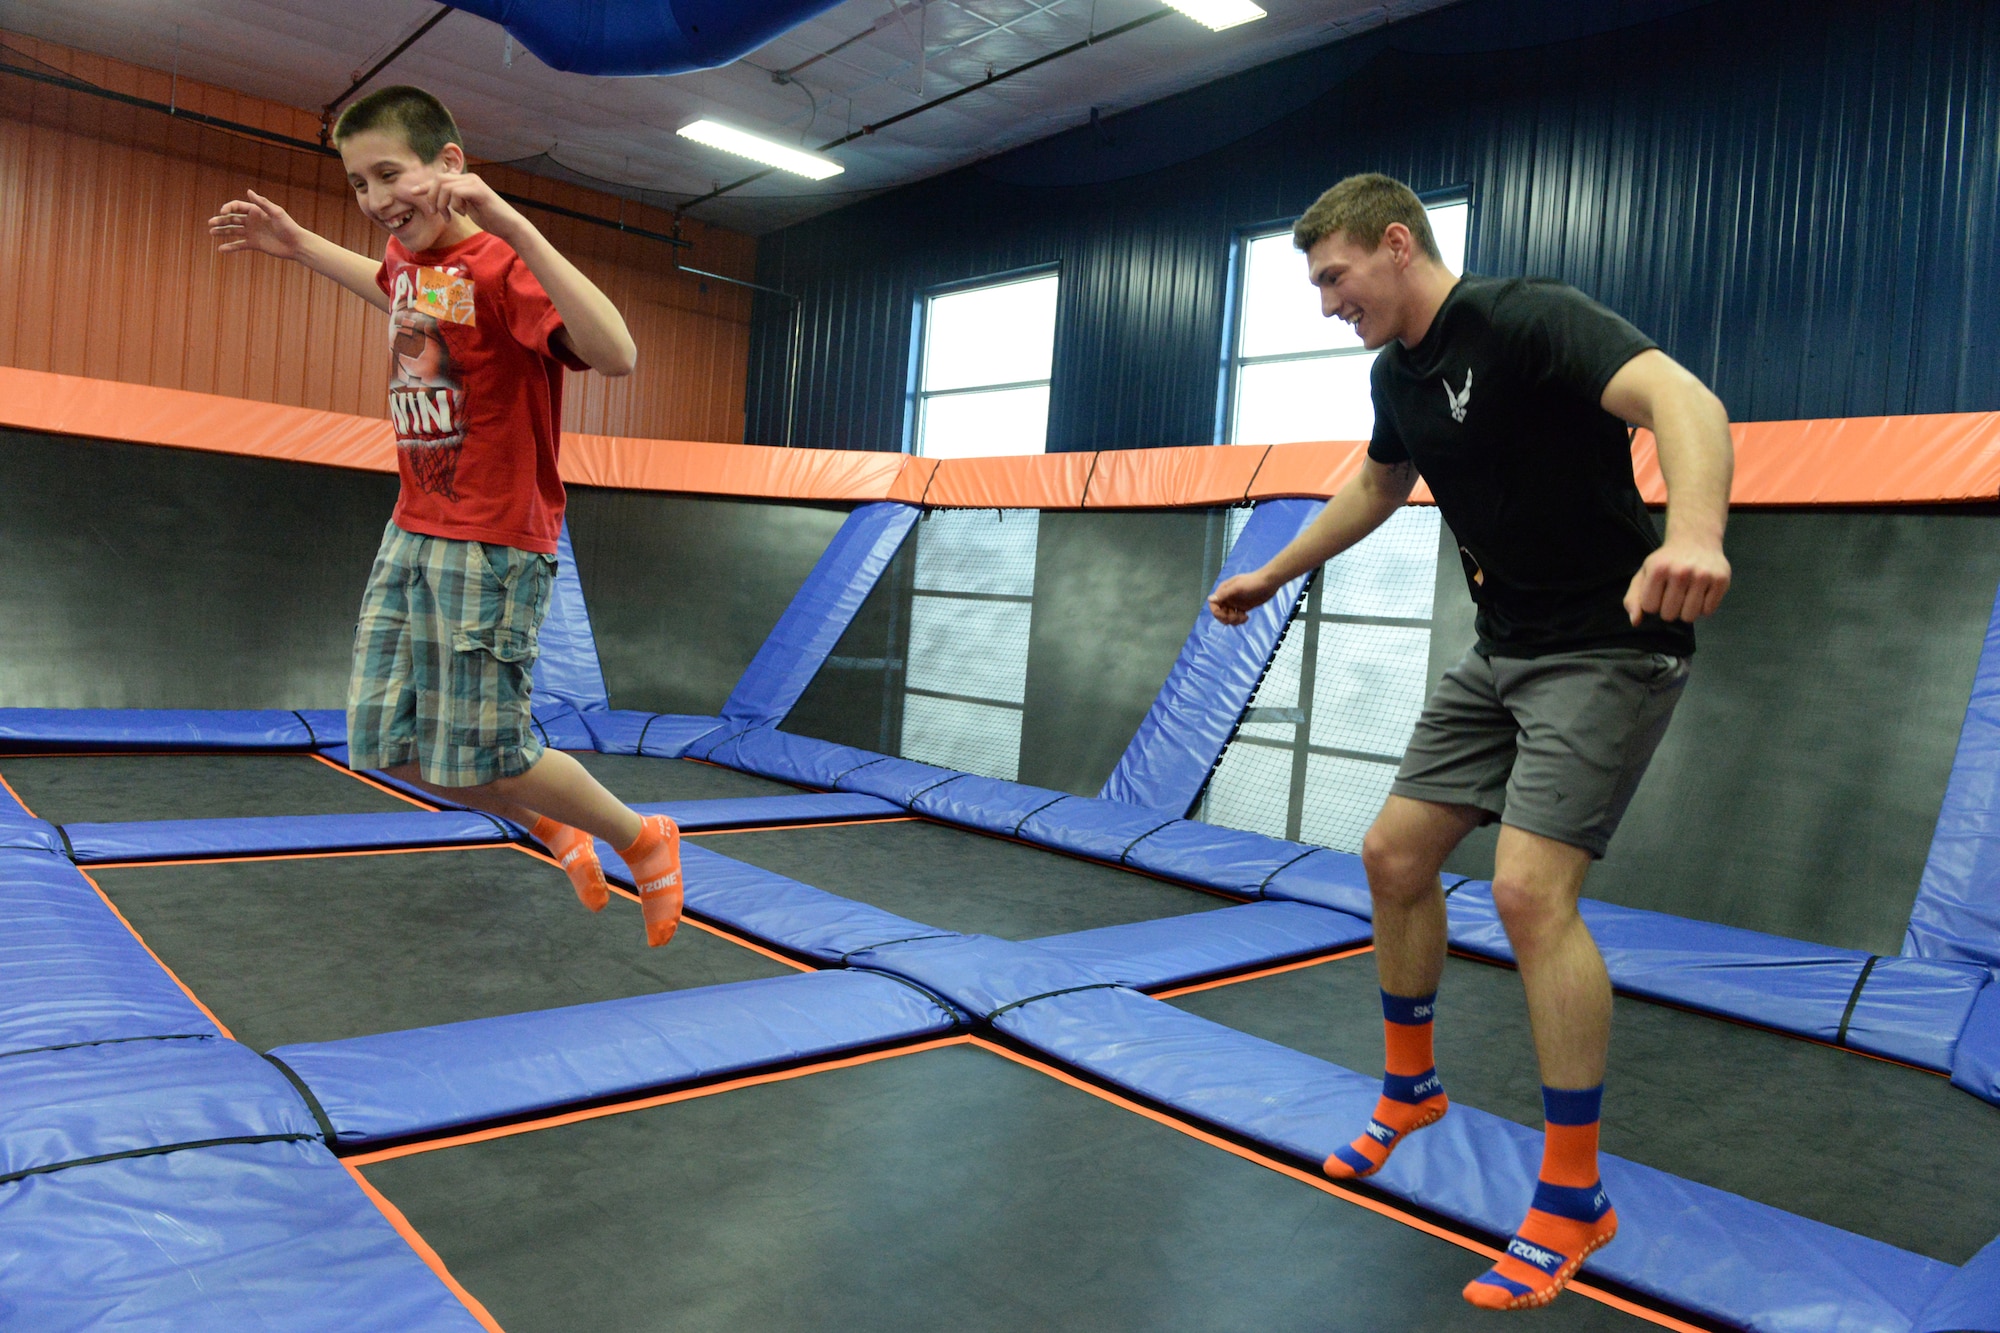 Senior Airman Sean Hummel, of the 119th Wing, right, jumps with his ‘little wingman’ Max during an outing at the Sky Zone indoor trampoline park, Fargo, North Dakota, April 16, 2015. Hummel has been mentoring Max for six years and is working on developing a youth mentoring program for members in the 119th Wing through the North Dakota Air National Guard Family Program called the Little Wingman Program. (U.S. Air National Guard photo by Senior Master Sgt. David H. Lipp/Released)